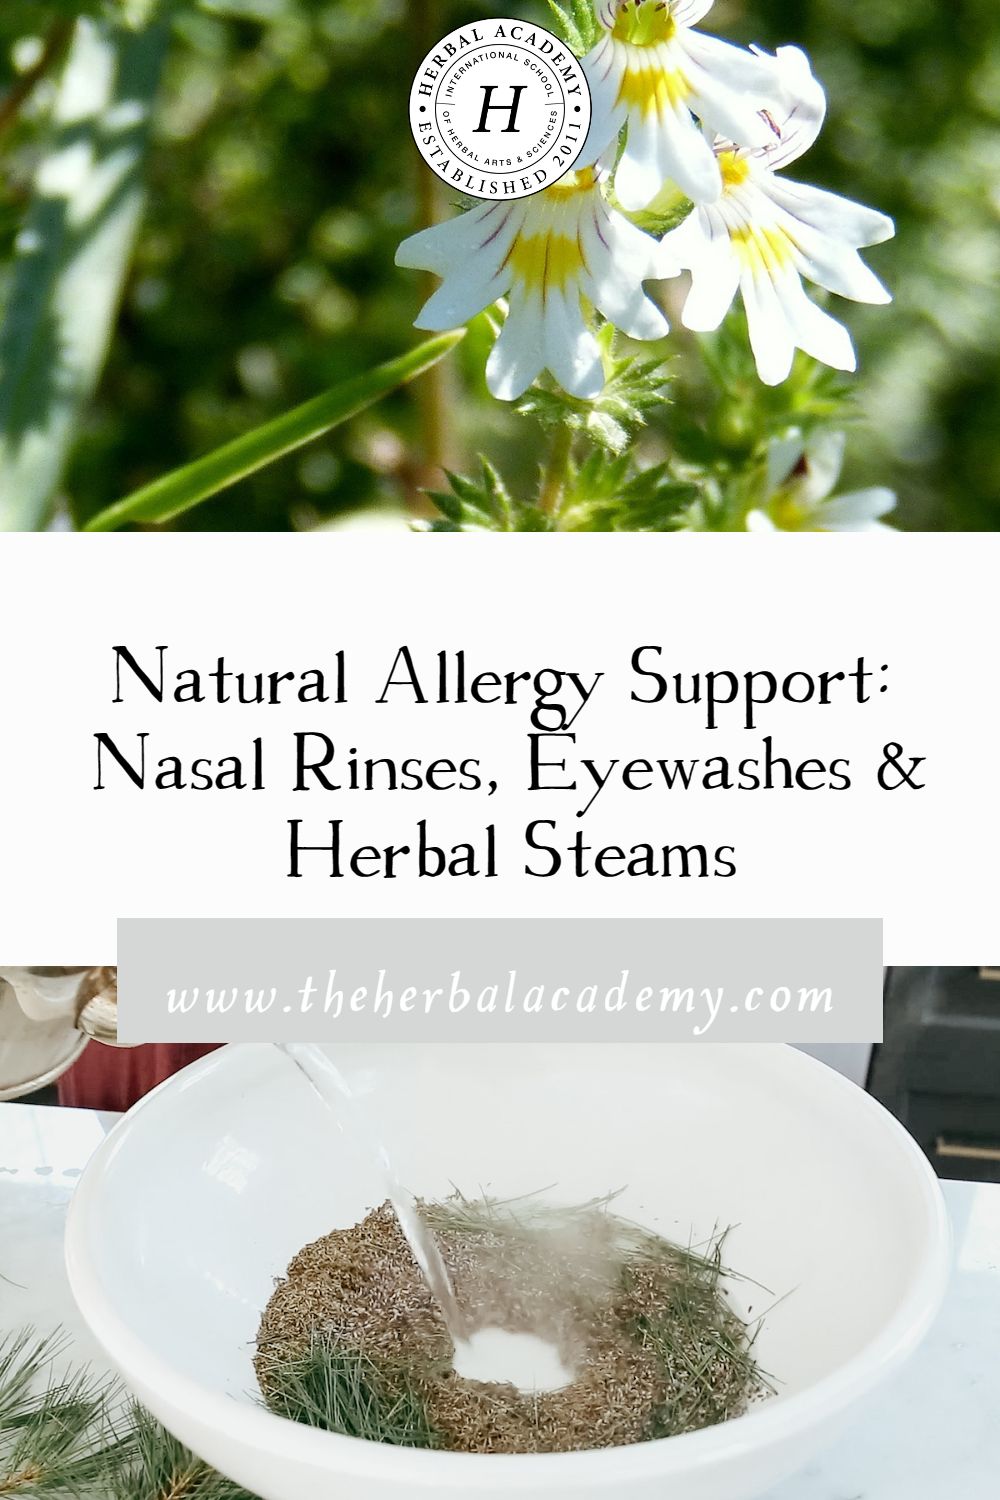 Natural Allergy Support: Nasal Rinses, Eyewashes & Herbal Steams | Herbal Academy | Learn the instructions and herbal recommendations for how to make nasal rinses, eyewashes, and herbal steams for natural allergy support.